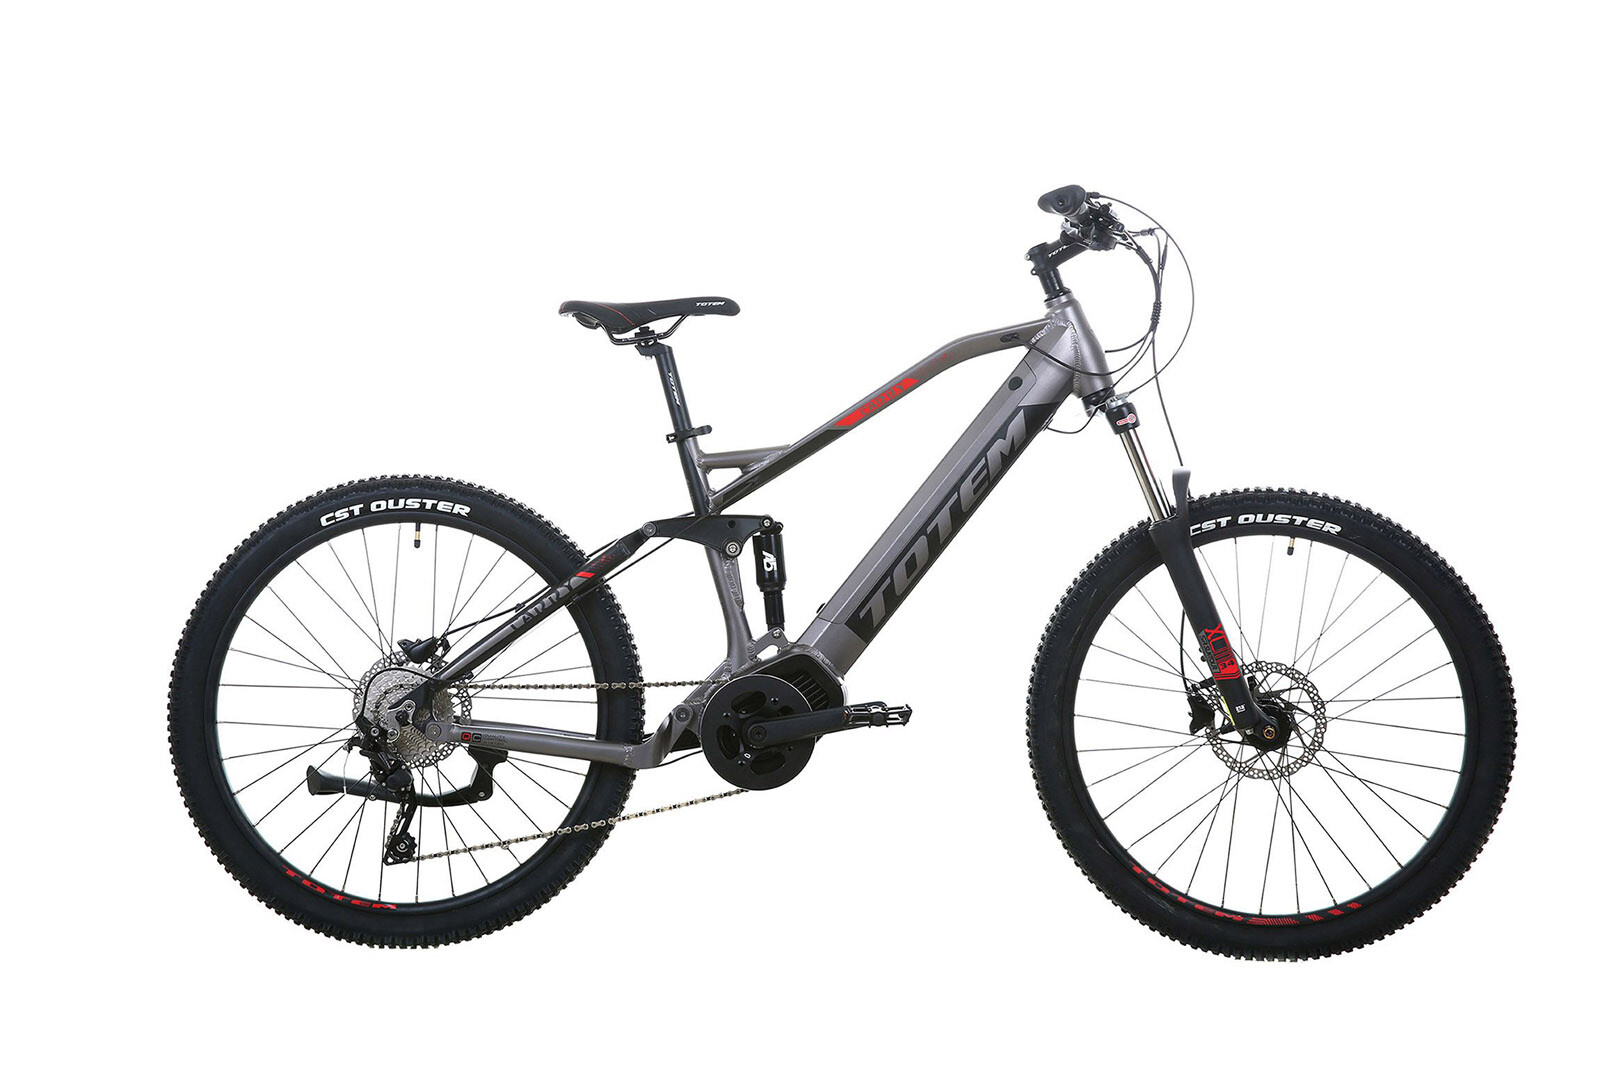 TOTEM Carry Pro 18" x 27.5" Dual Suspension Boost E-Bike : Grey/Black/Red